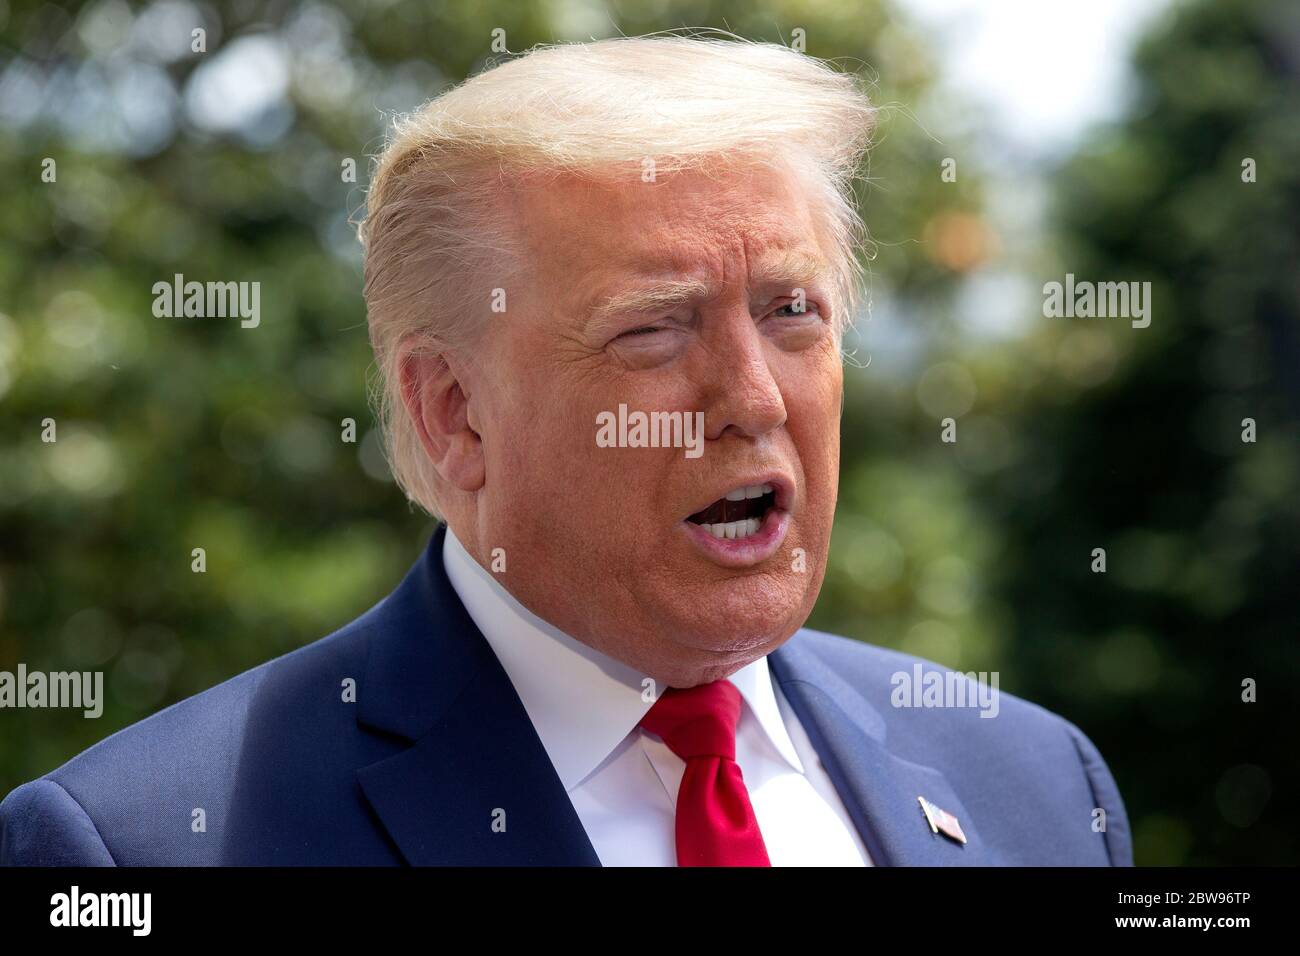 United States President Donald J. Trump speaks to members of the media as he departs the White House in Washington, DC, U.S., on Saturday, May 30, 2020. Trump has used Twitter to criticize protests prompted by the death of George Floyd, as well as the response of Democratic leaders, after demonstrators clashed with Secret Service agents outside the White House last night.Credit: Stefani Reynolds/Pool via CNP /MediaPunch Stock Photo